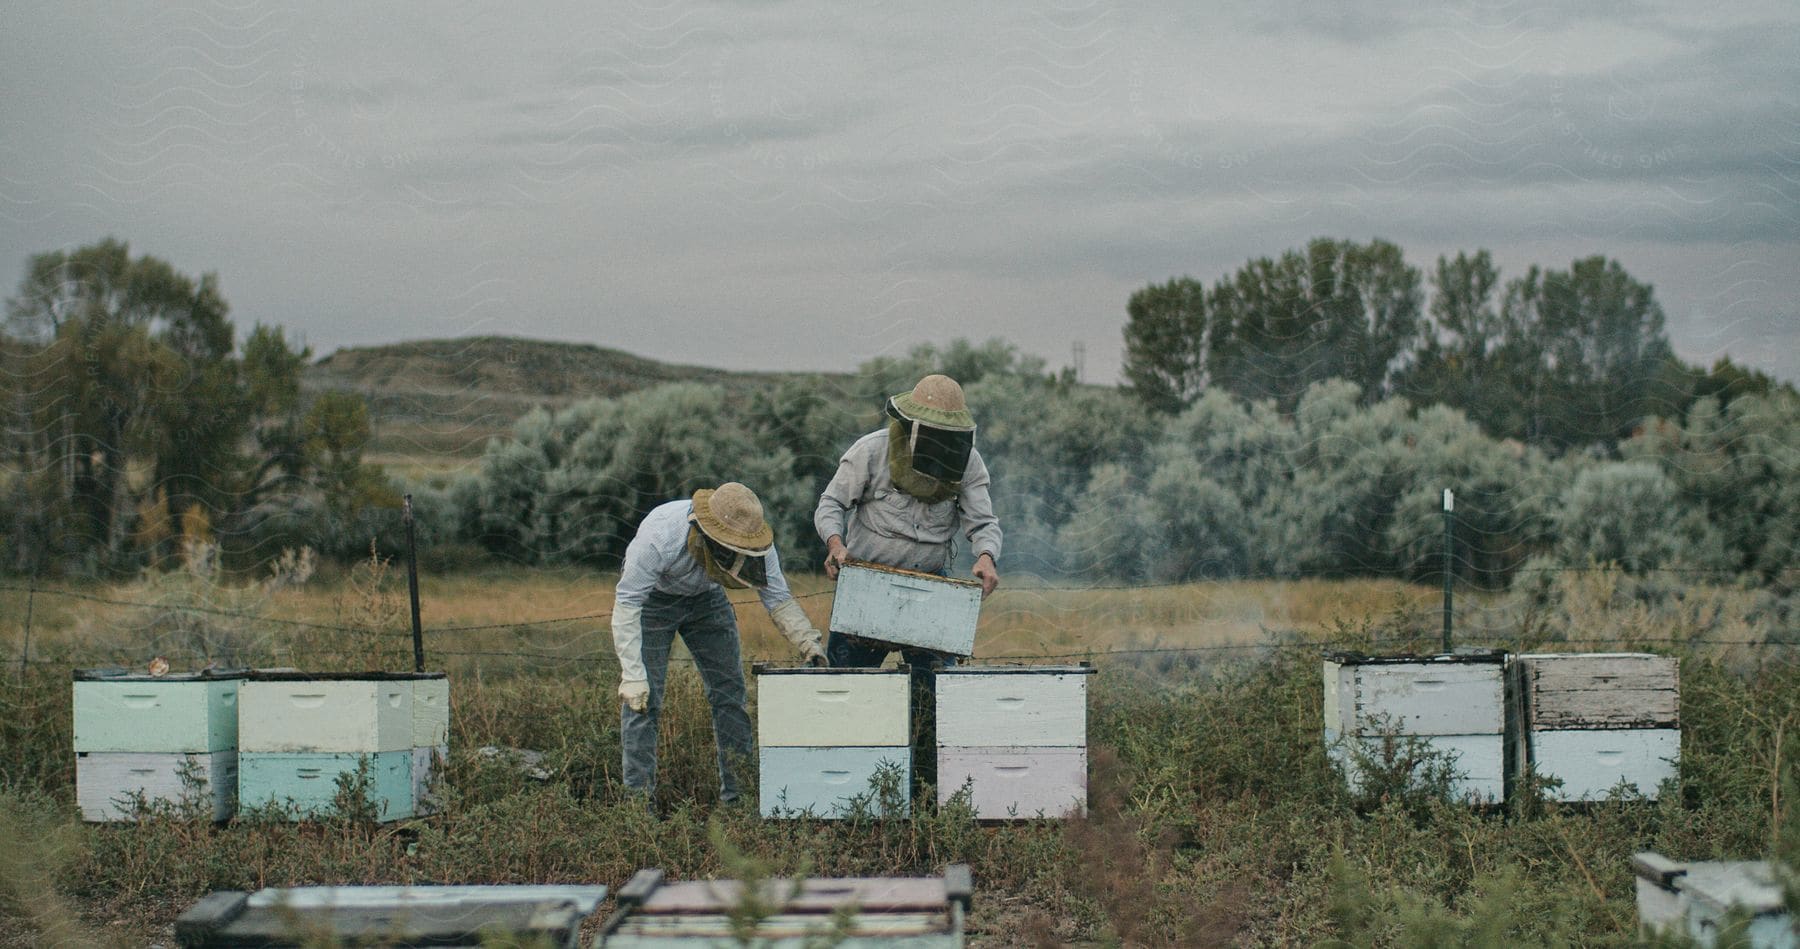 Beekeepers inspect and manage hives in a rural apiary at dusk, with overcast skies and a backdrop of lush greenery.